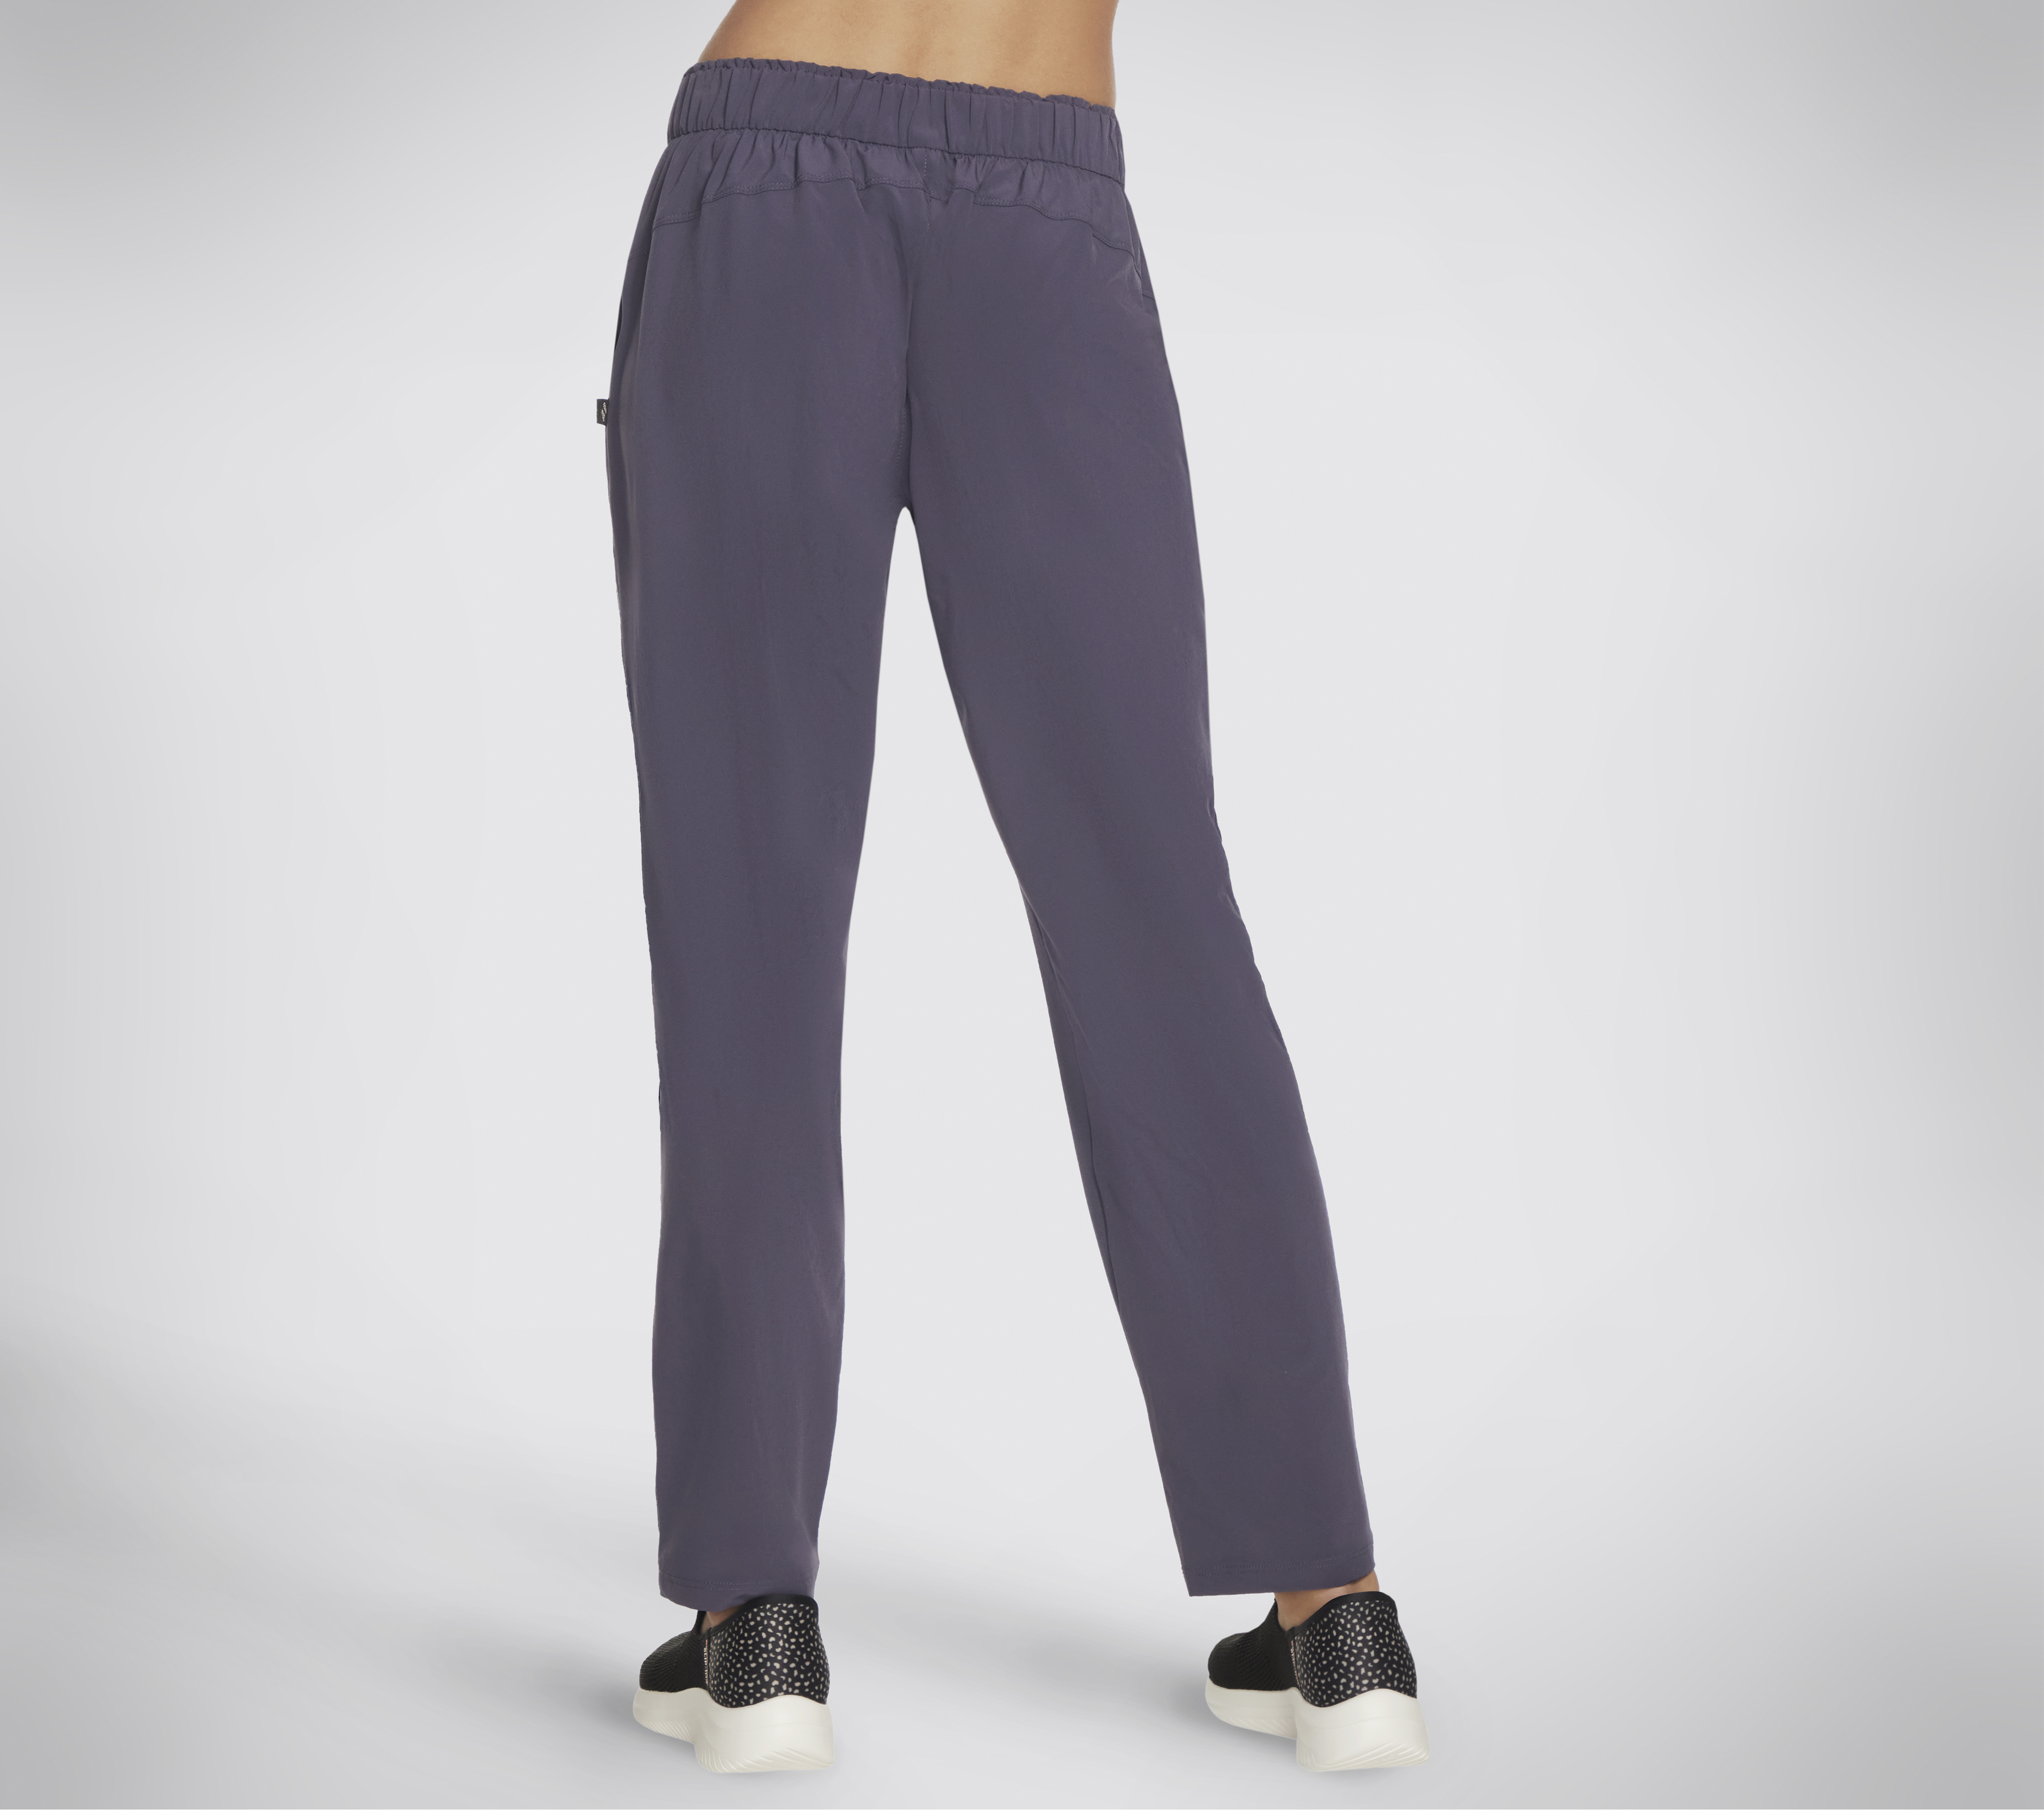 Skechers go walk pants Blue Size L petite - $20 (59% Off Retail) New With  Tags - From lorelei